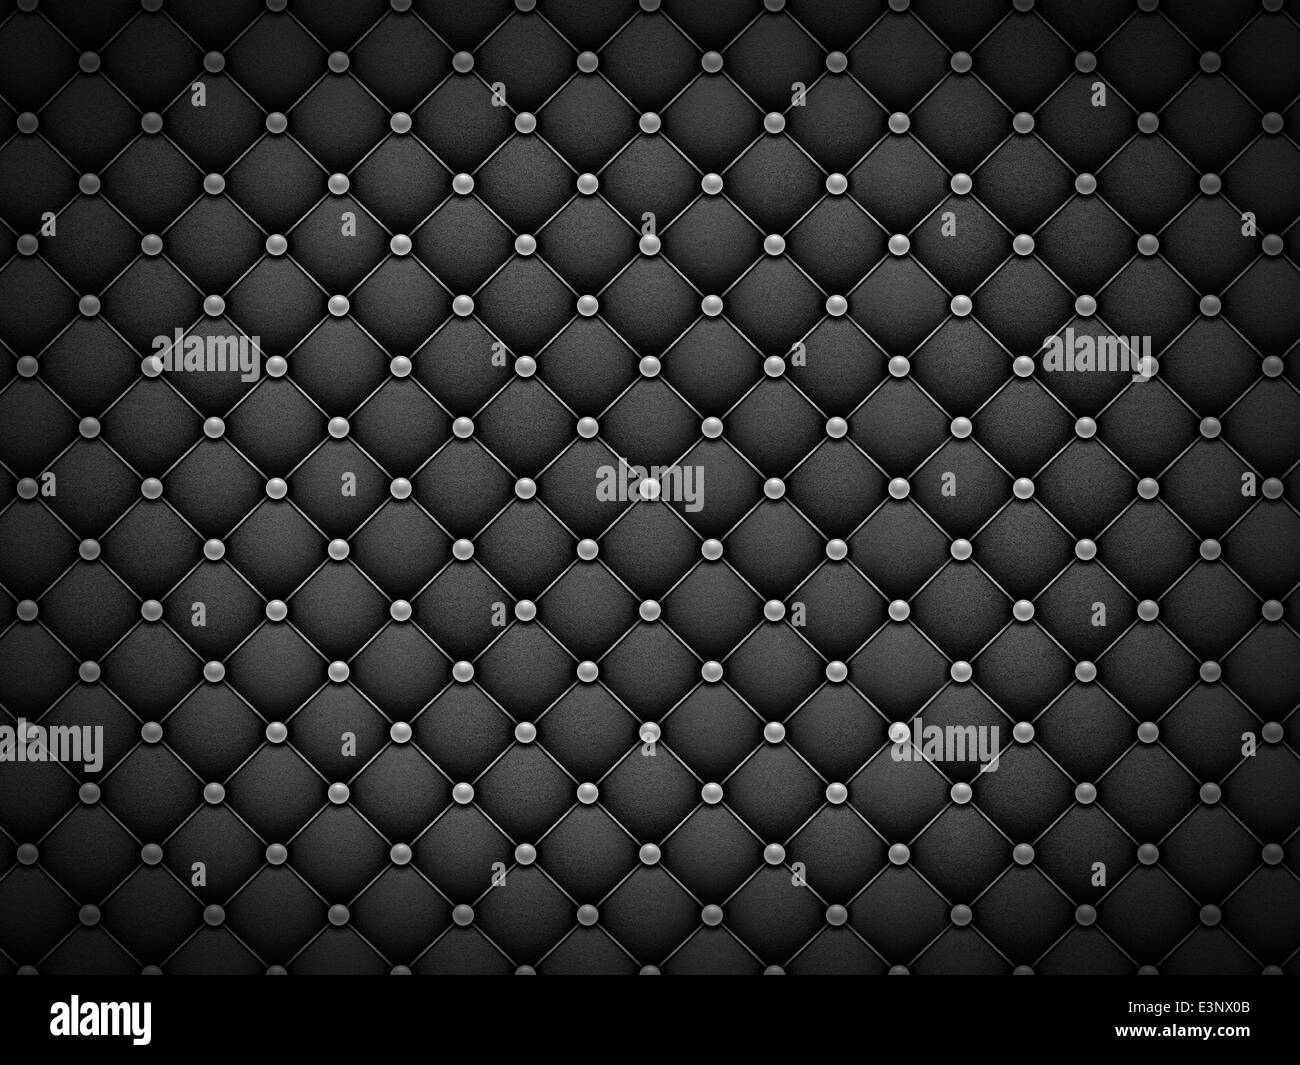 Gray background embroidered by pearl grid. Stock Photo